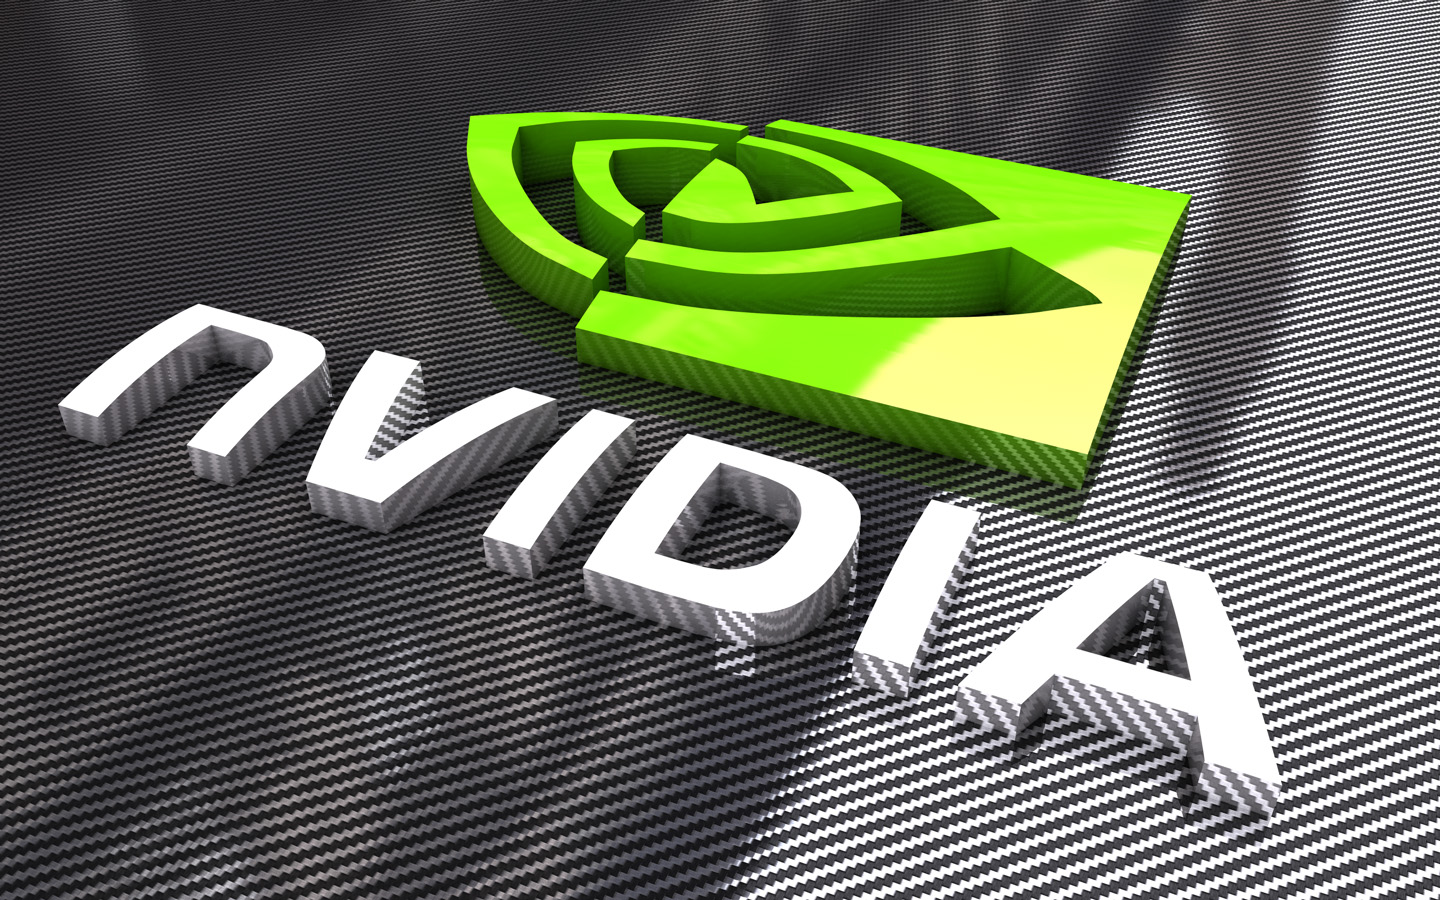 Graphics Wars Nvidia Goes For Broke Two Nerds Flip Out